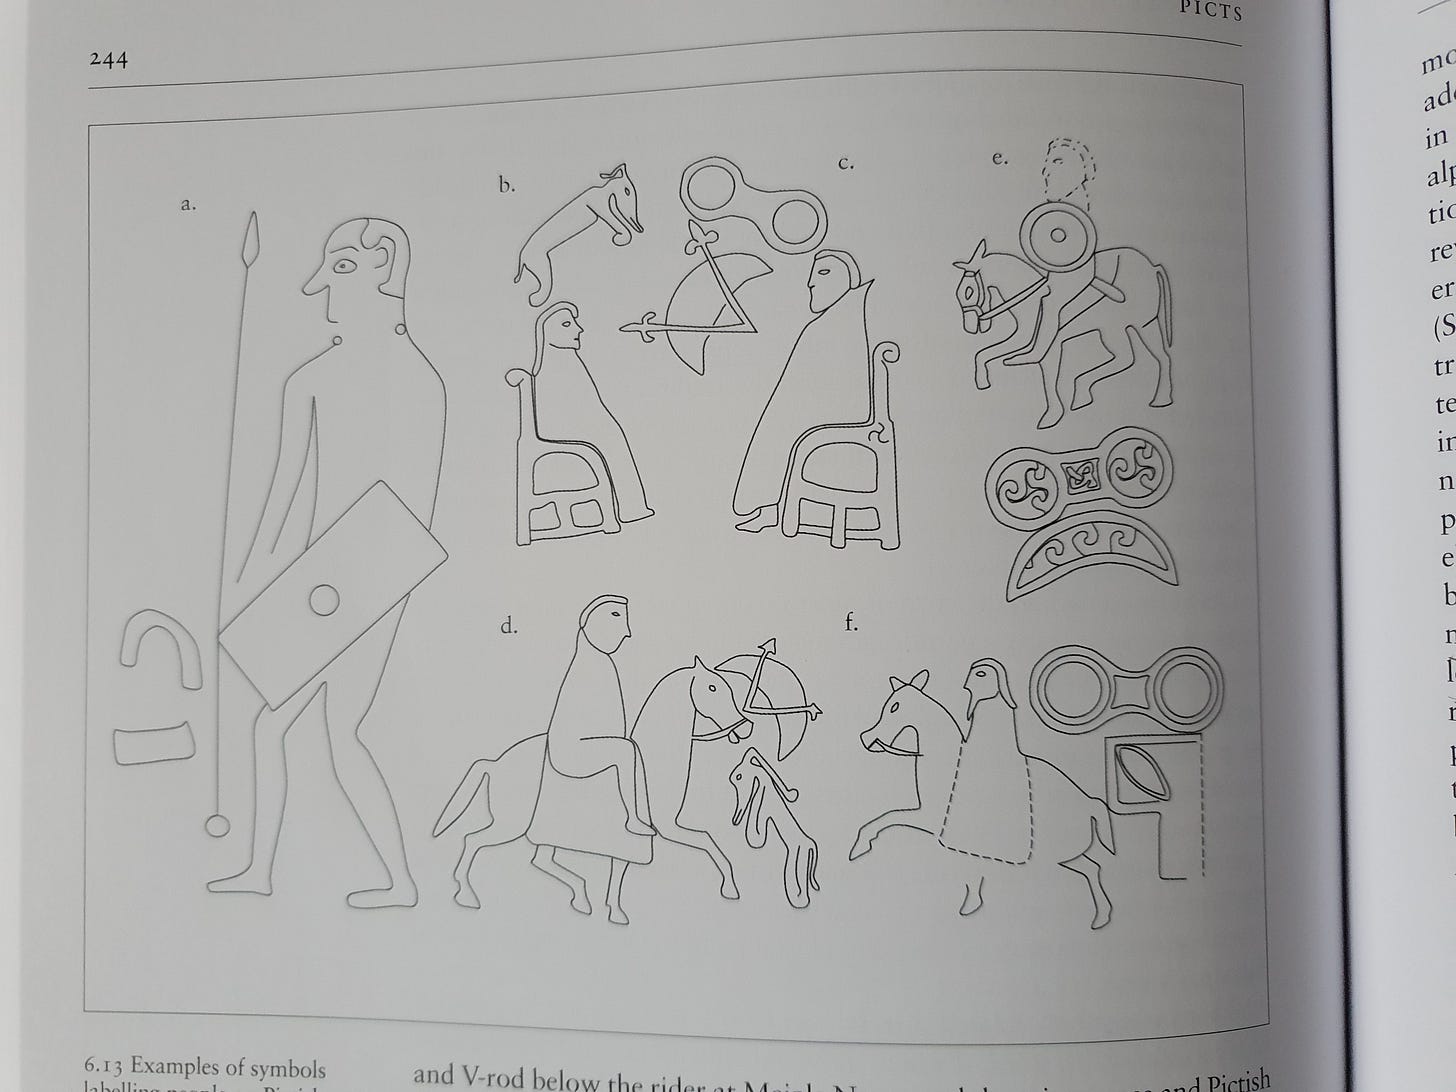 Example illustration from the book: Pictish symbols used to “label” figured on carved stones, suggesting their function was to mark identities.